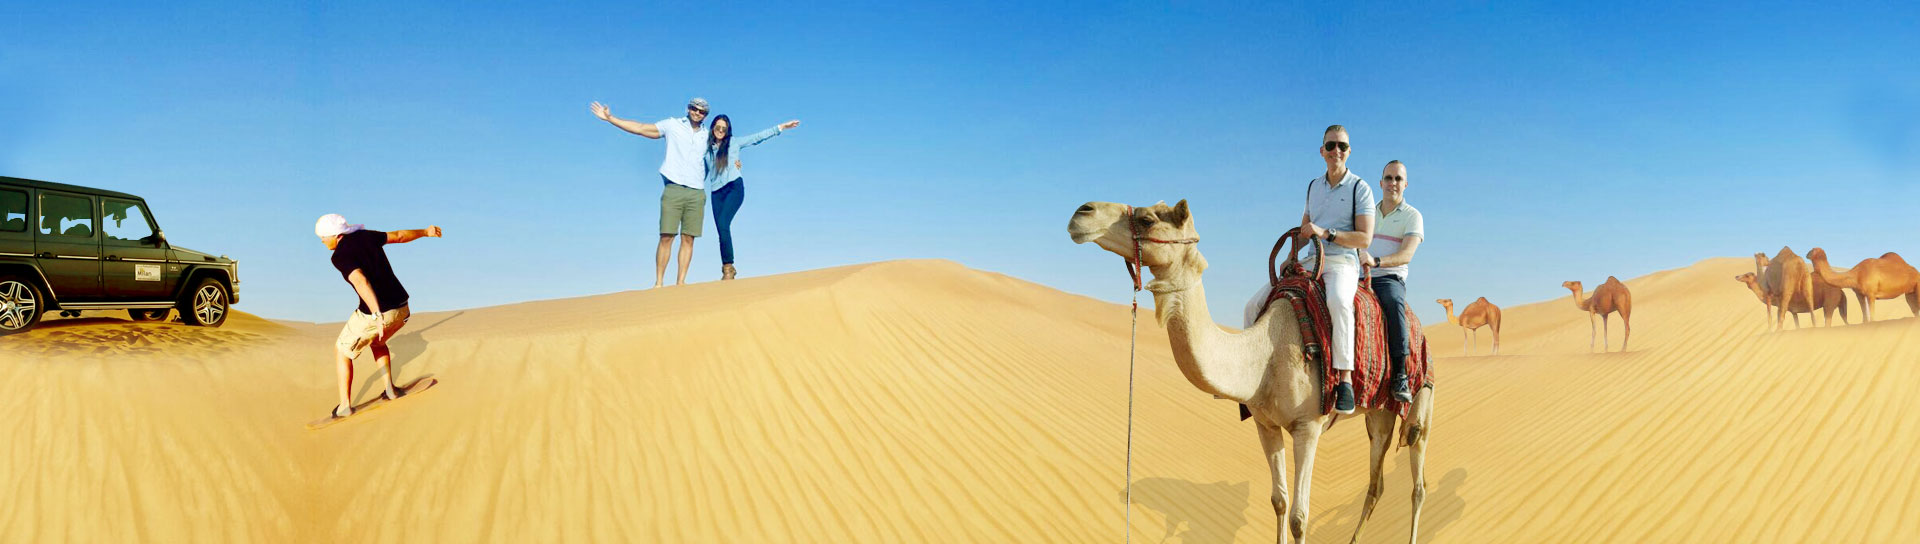 Abu Dhabi holiday packages to enjoy your vacations in UAE